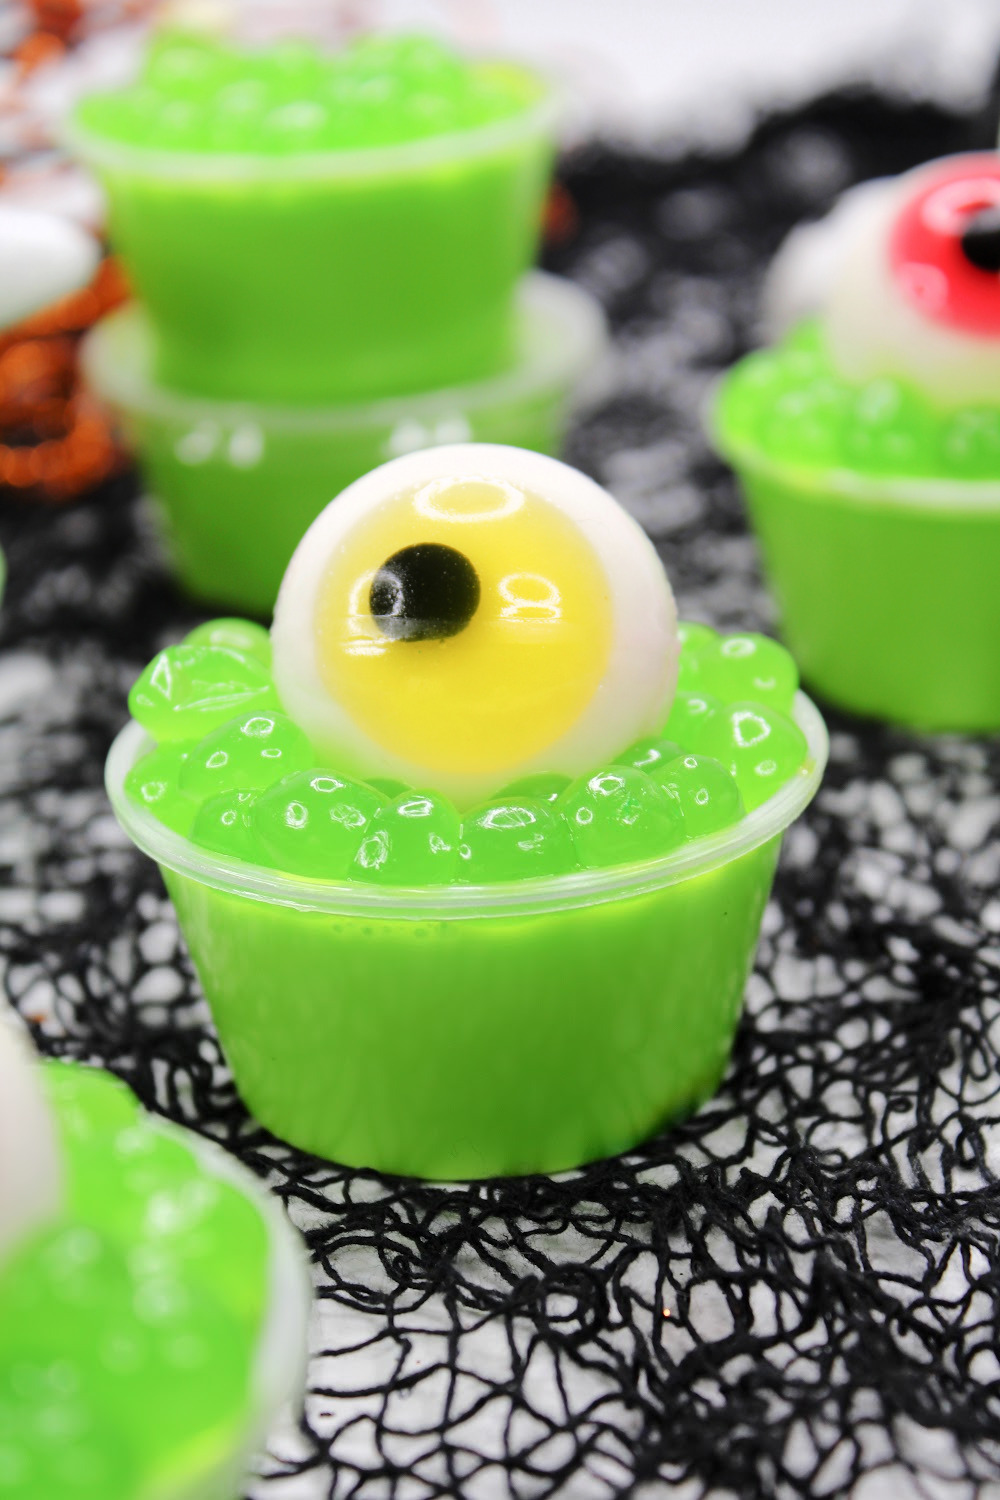 These Halloween Eyeball Jello Shots are topped with green boba and a gummy eyeball with yellow iris perfect for Halloween! Several of them are sitting on a black spiderweb background.